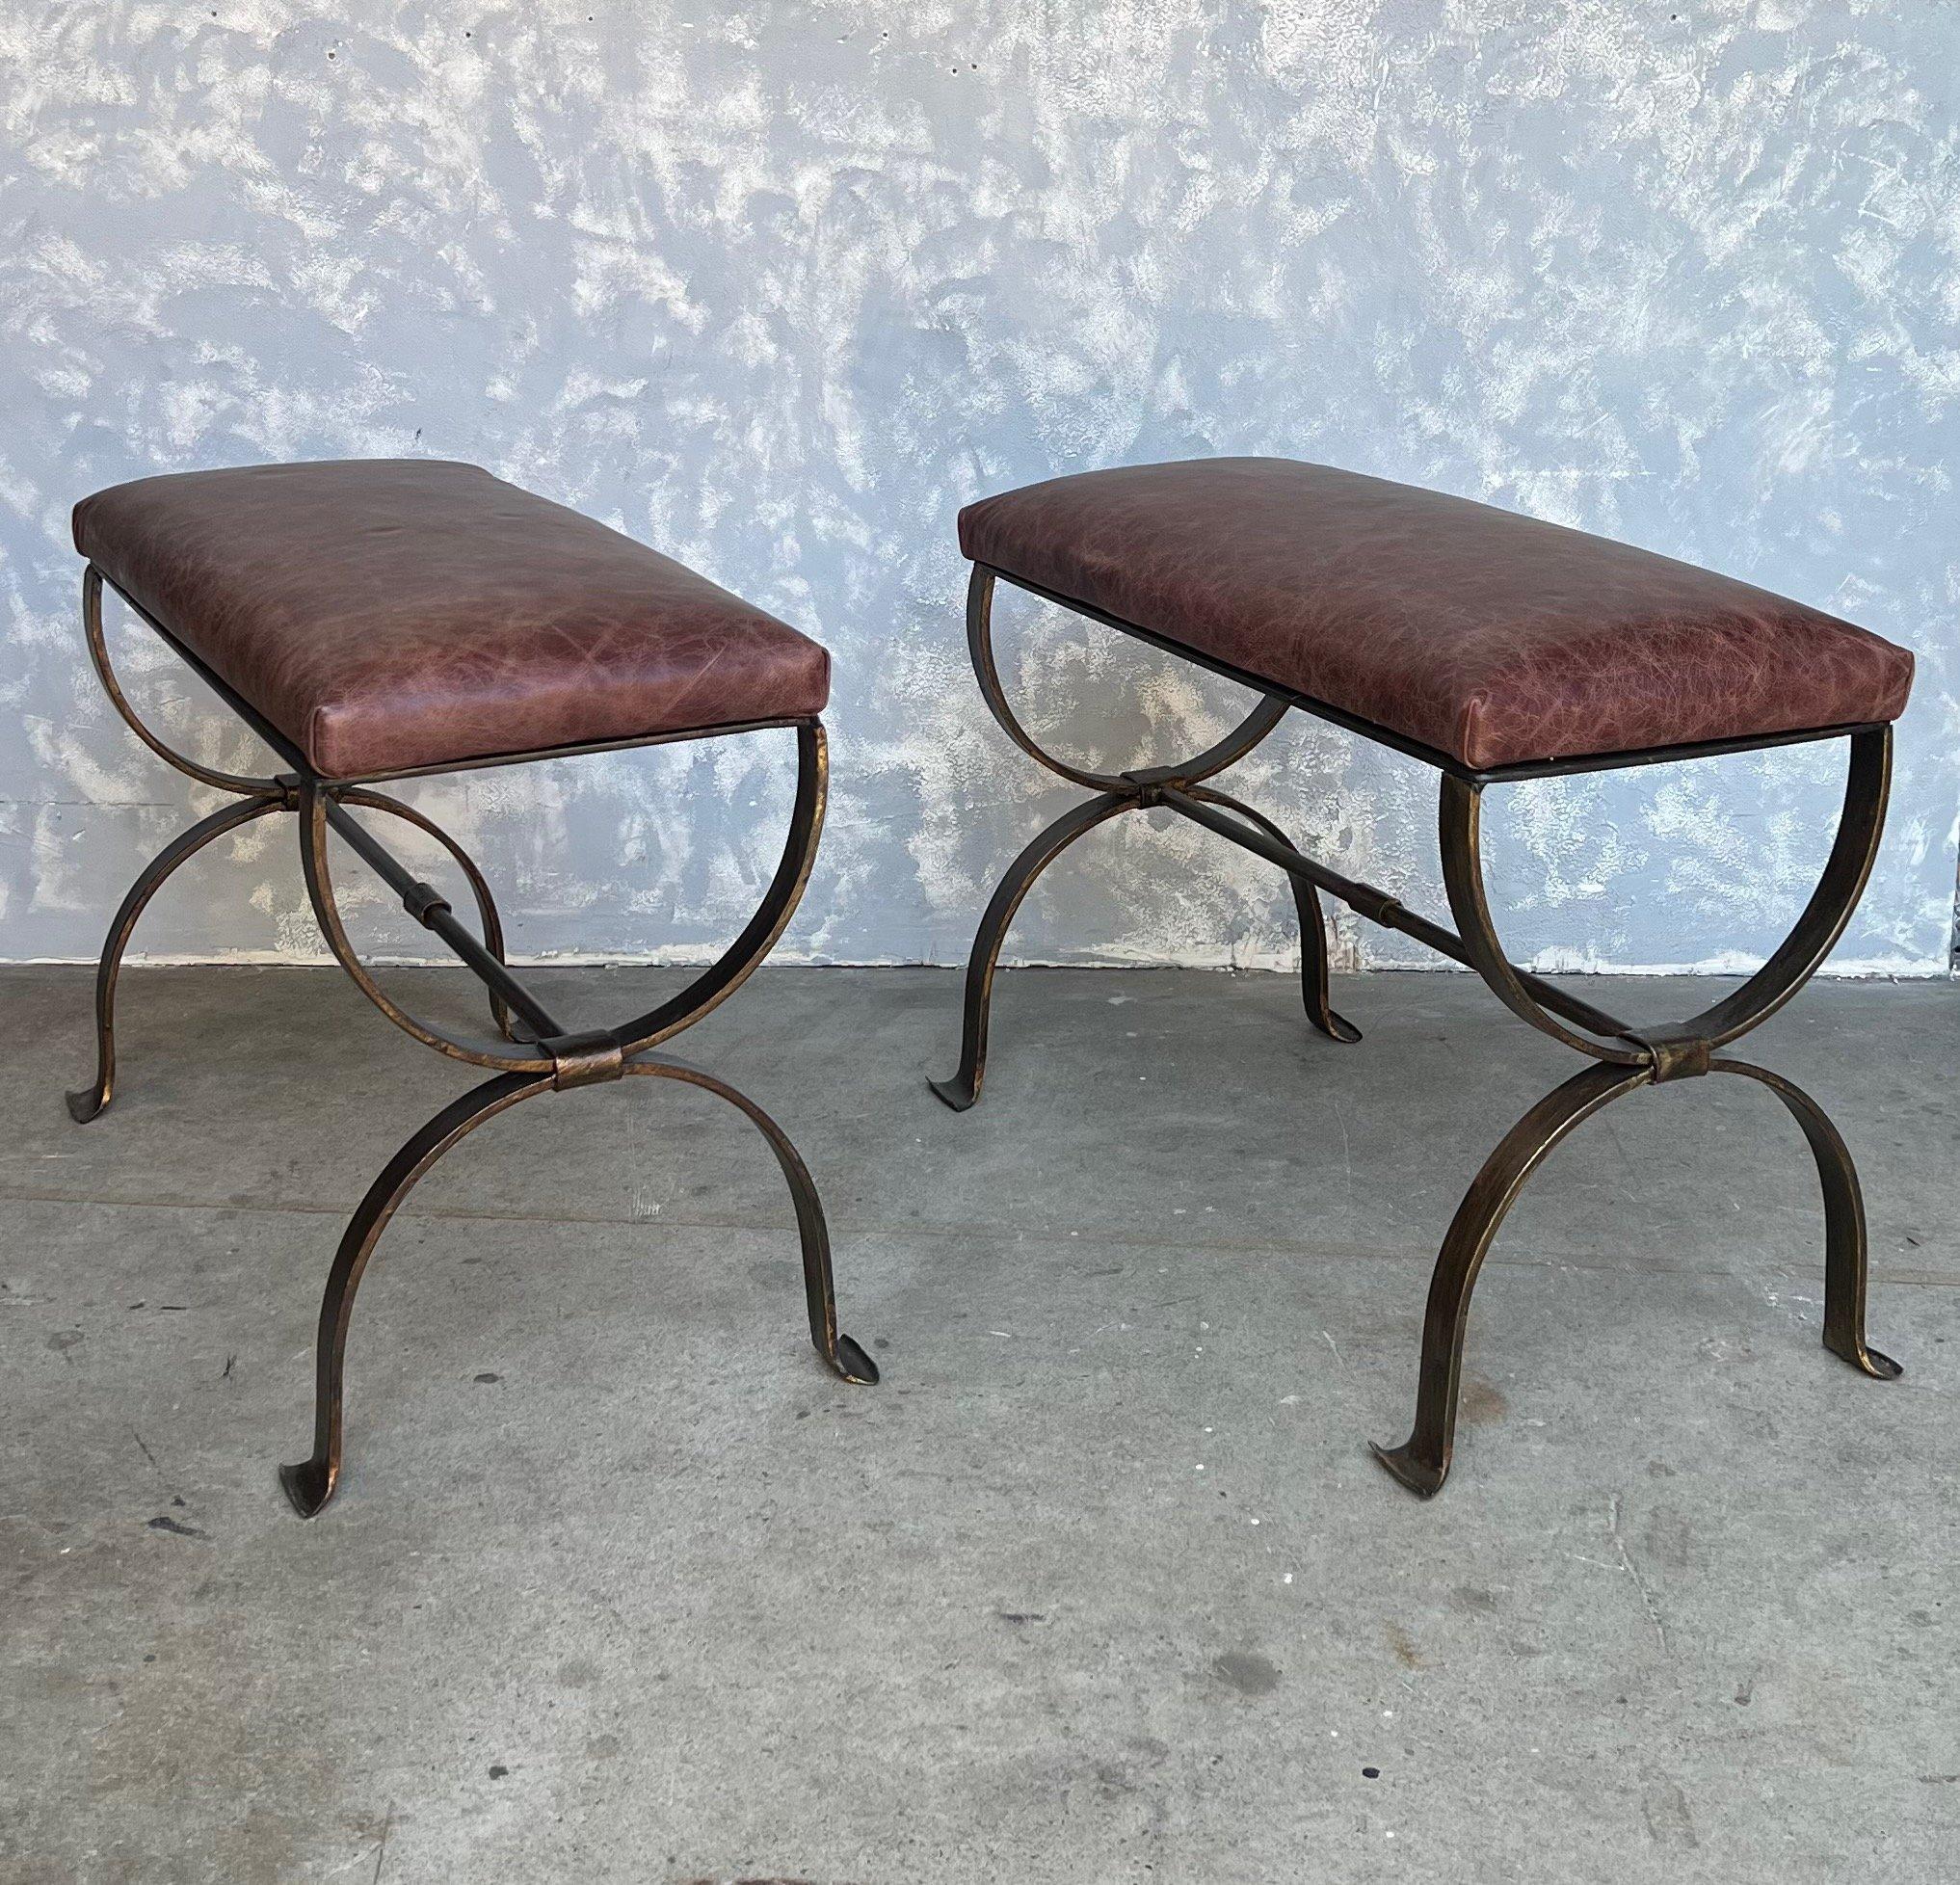 This pair of Spanish 1950s benches, made from gilt iron, holds an elegance that is both timeless and distinctive. The hourglass frames, central stretcher, and gently curved feet each contribute to its unique vintage charm. The iron frames are